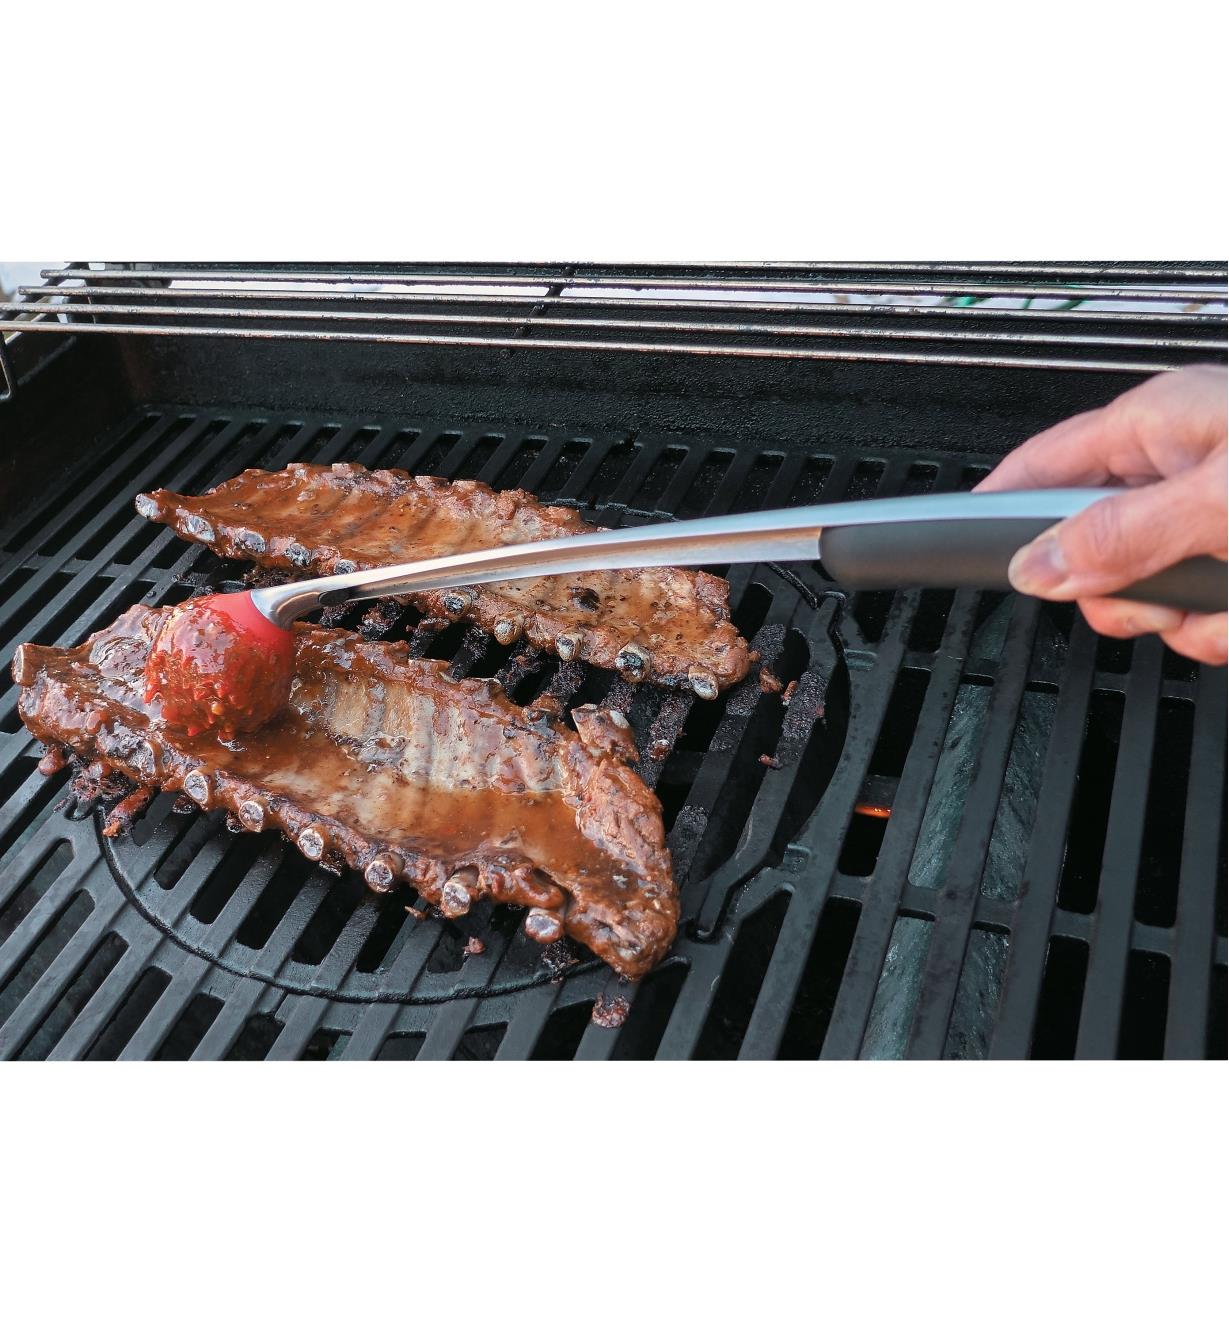 Using the Sauce Mop to baste steaks on the barbecue